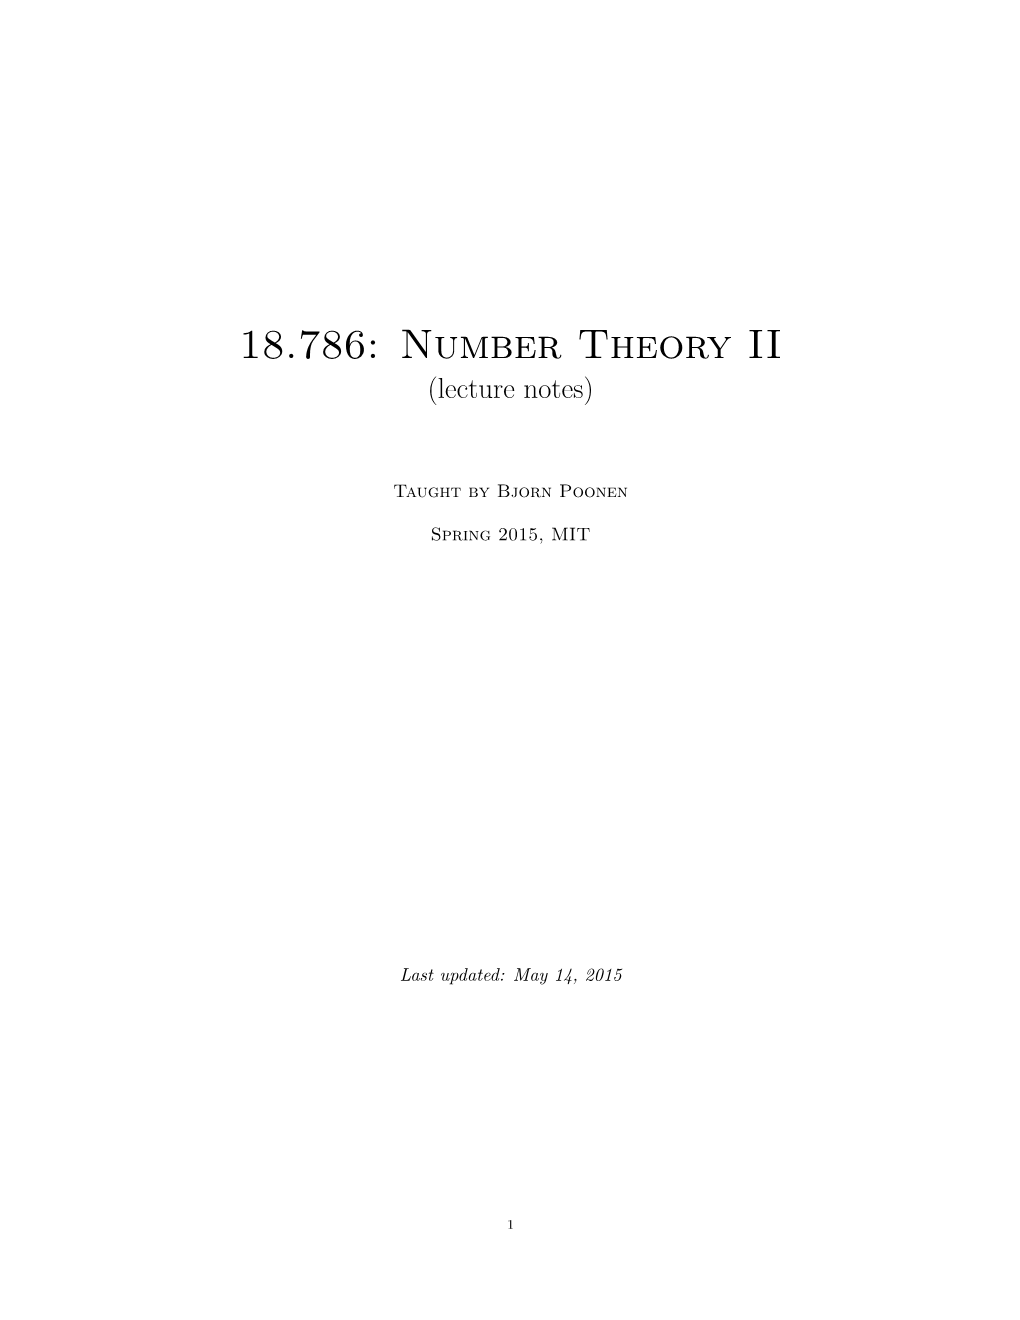 18.786: Number Theory II (Lecture Notes)